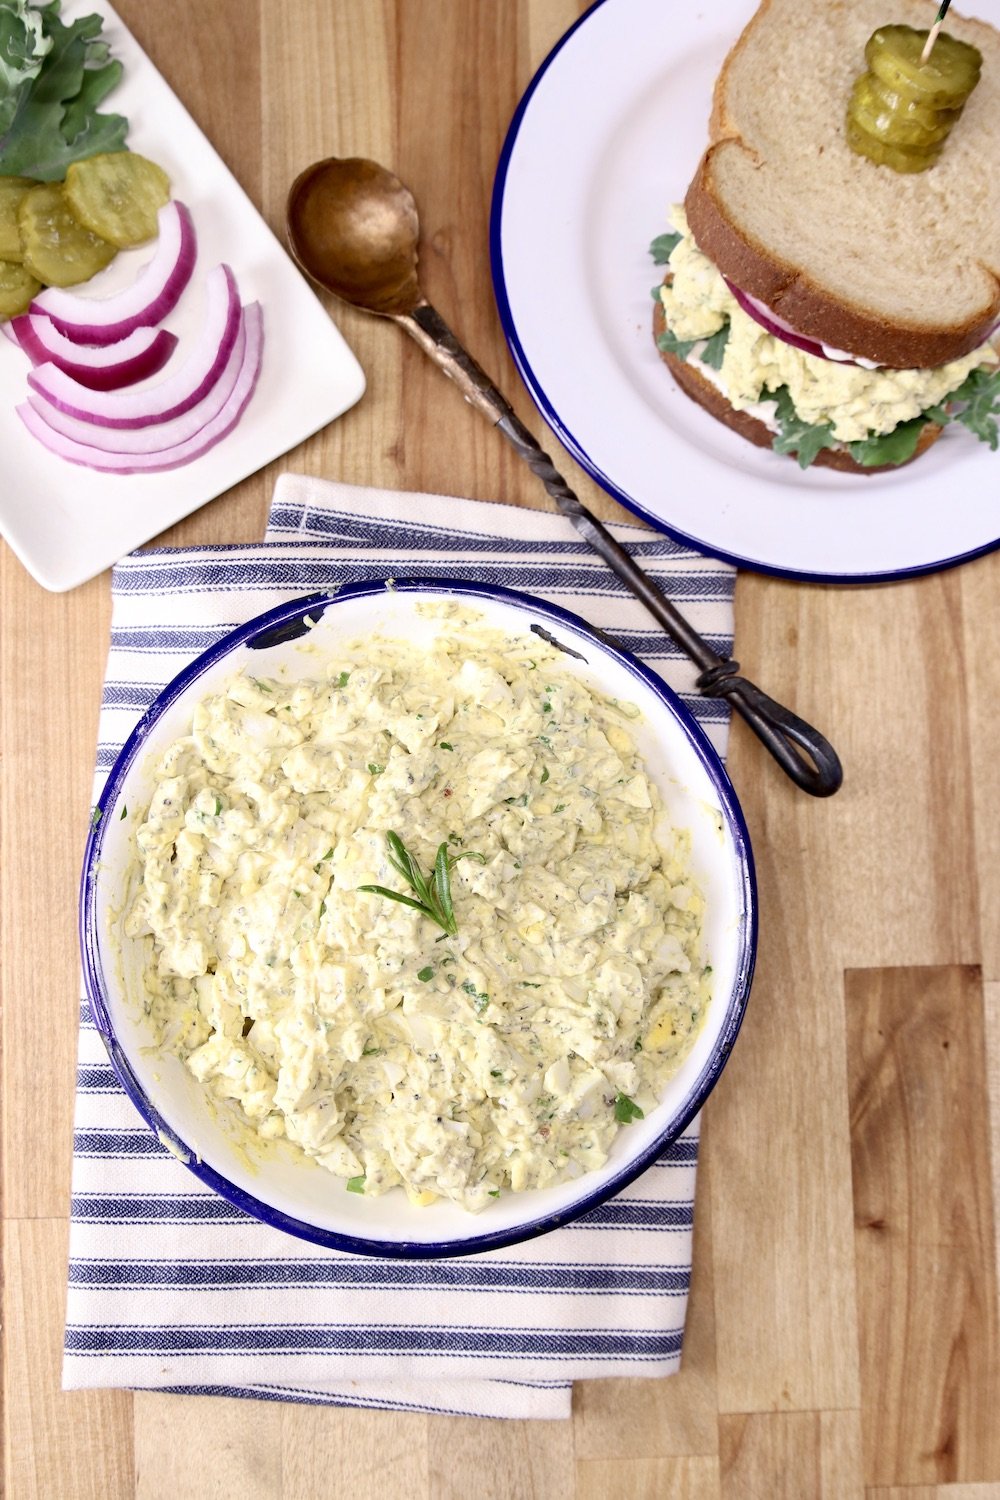 Bowl of egg salad, plate with red onions, lettuce and sandwich